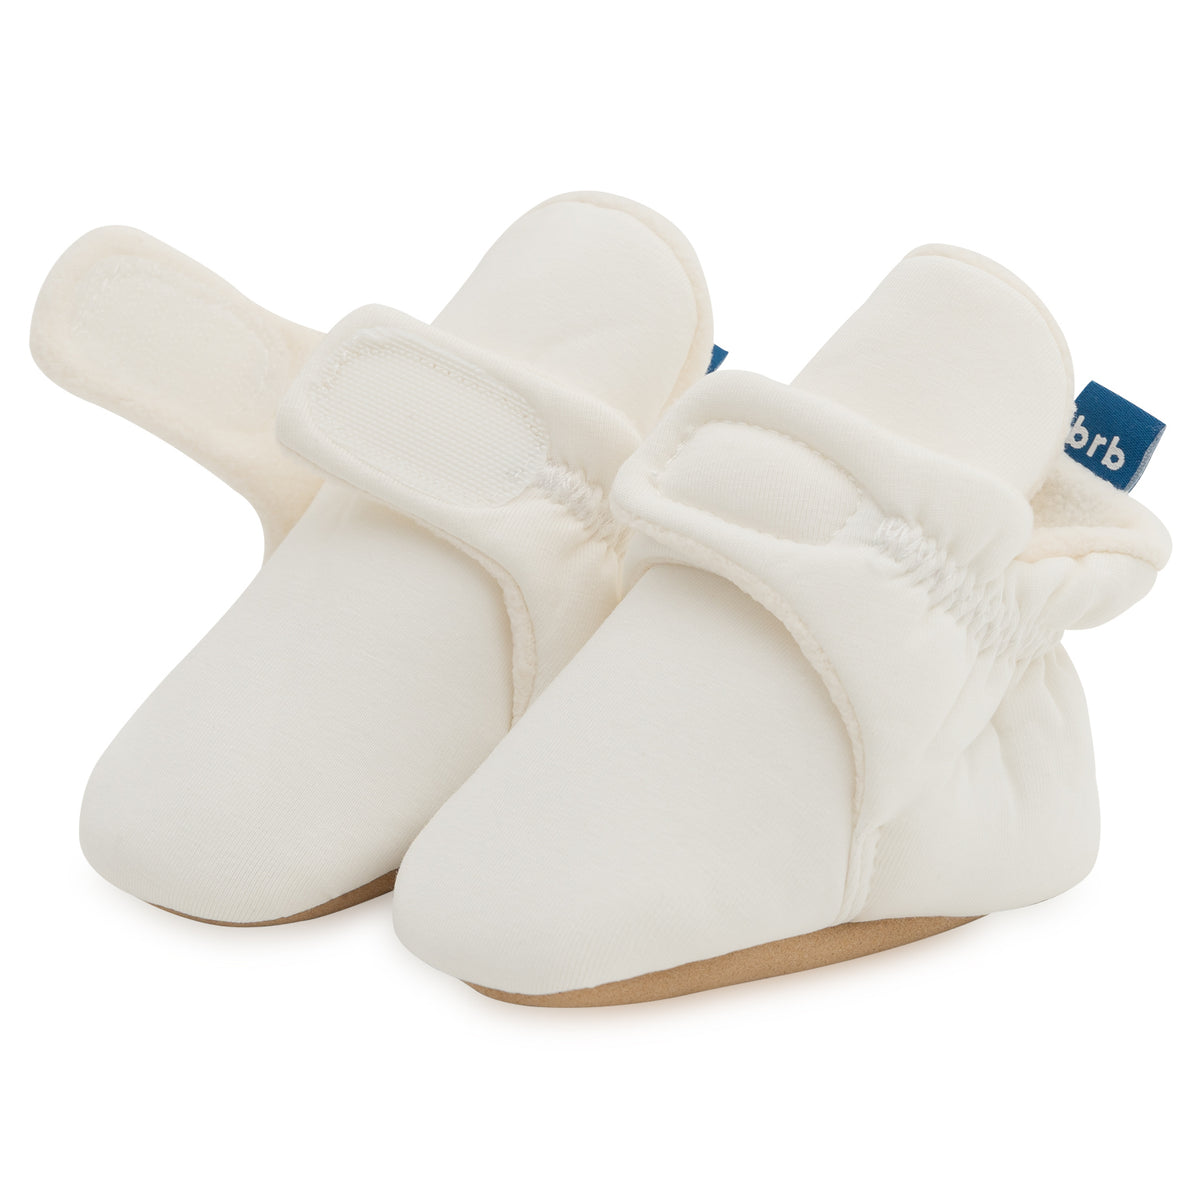 White Baby Booties